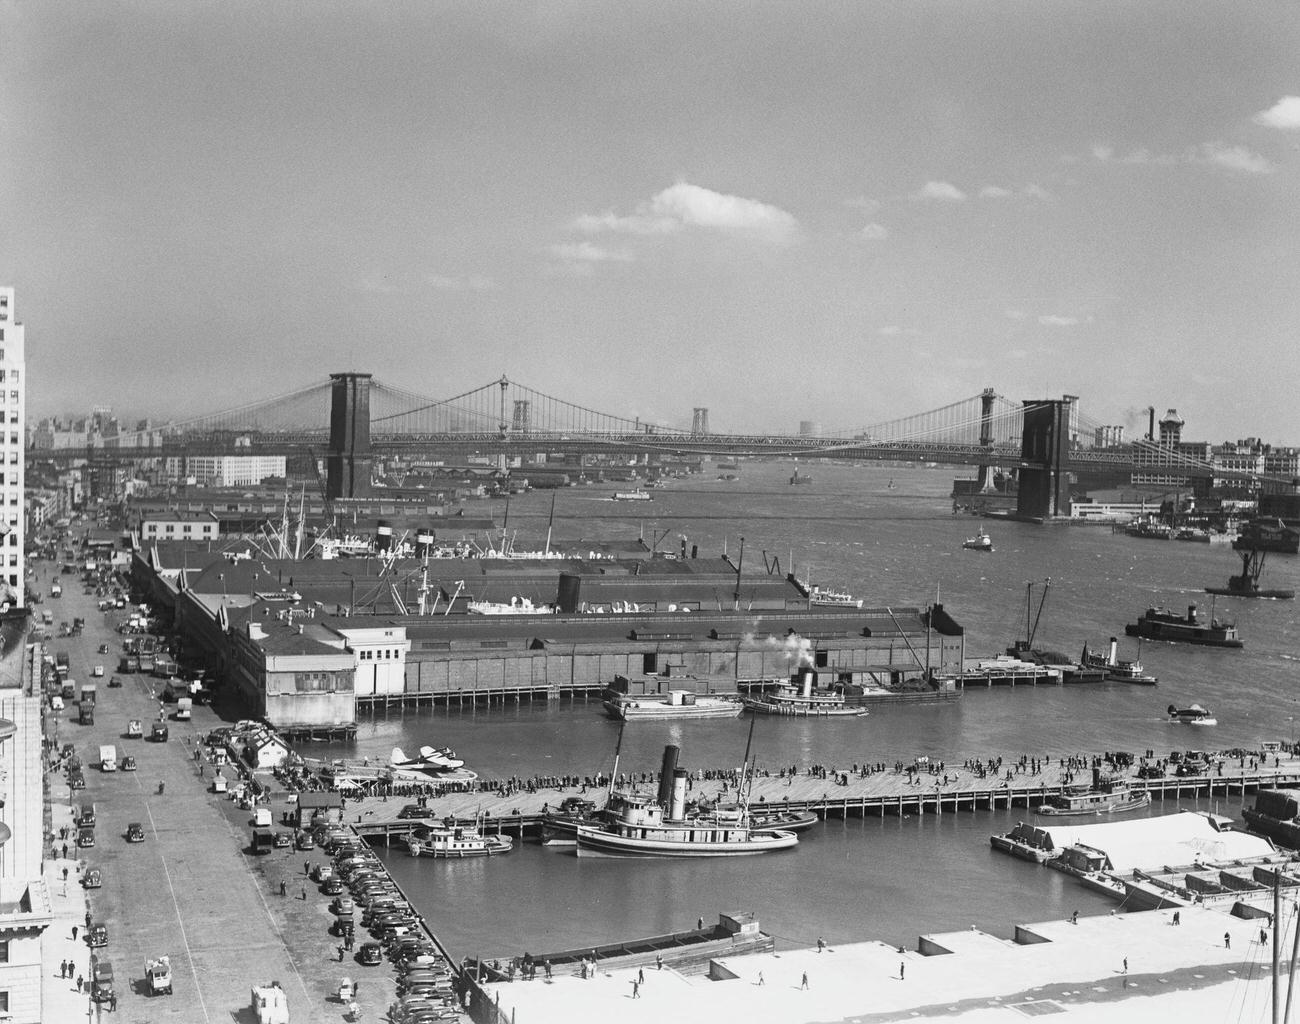 East River Viewed From Manhattan, With The Brooklyn Bridge In The Background, September 1938.